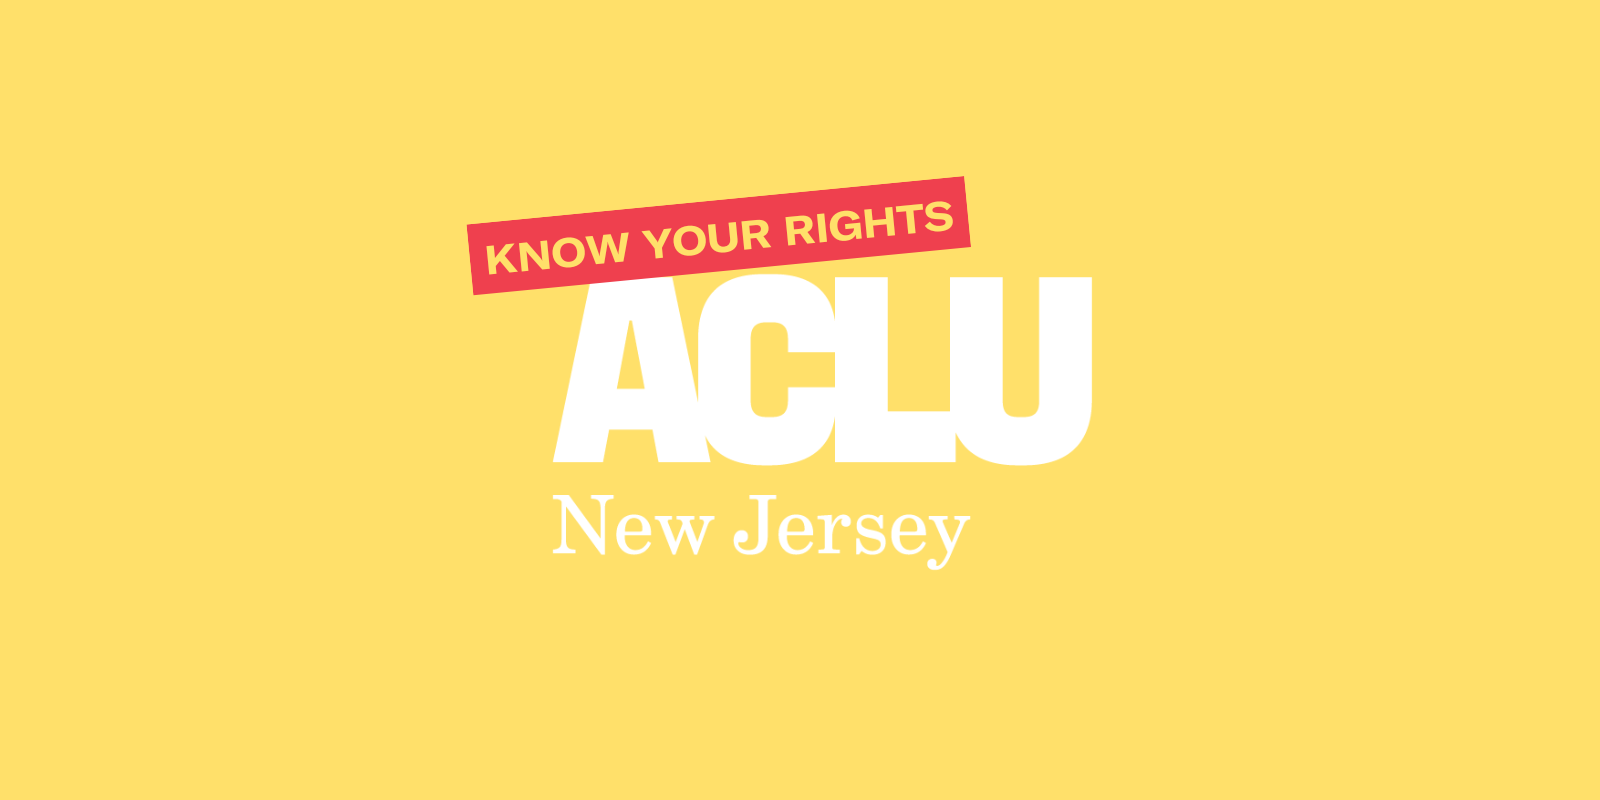 ACLU-NJ logo with a banner at the top reading "Know Your Rights" against a yellow background